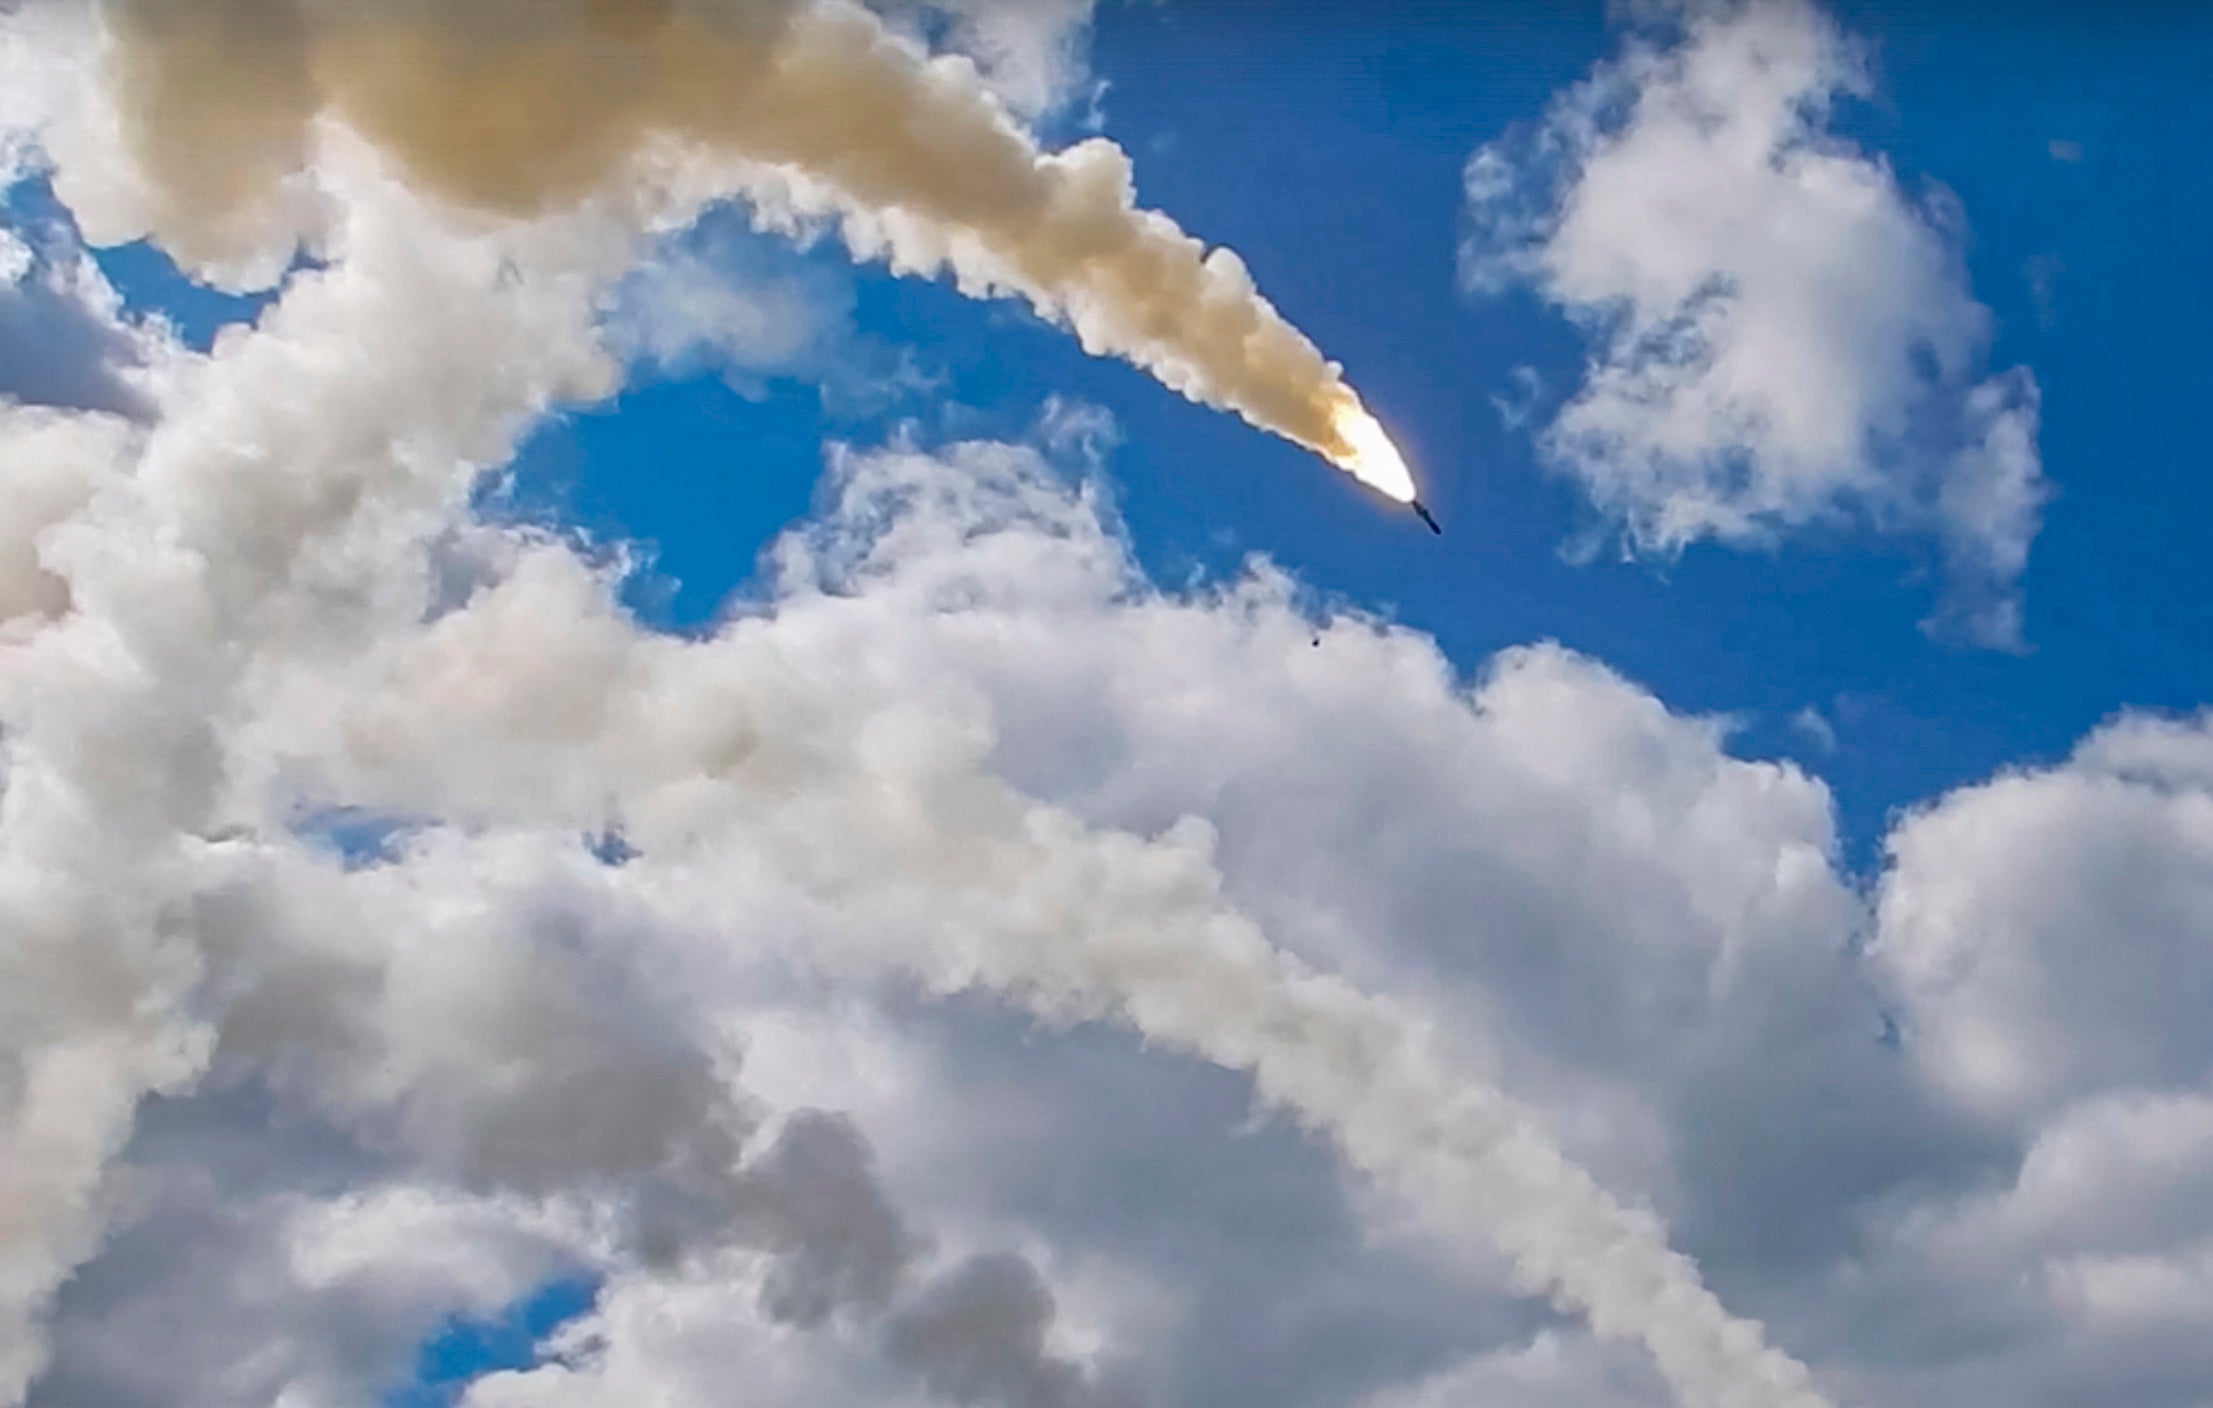 A Russian missile is launched against Ukraine on 23 March 2022